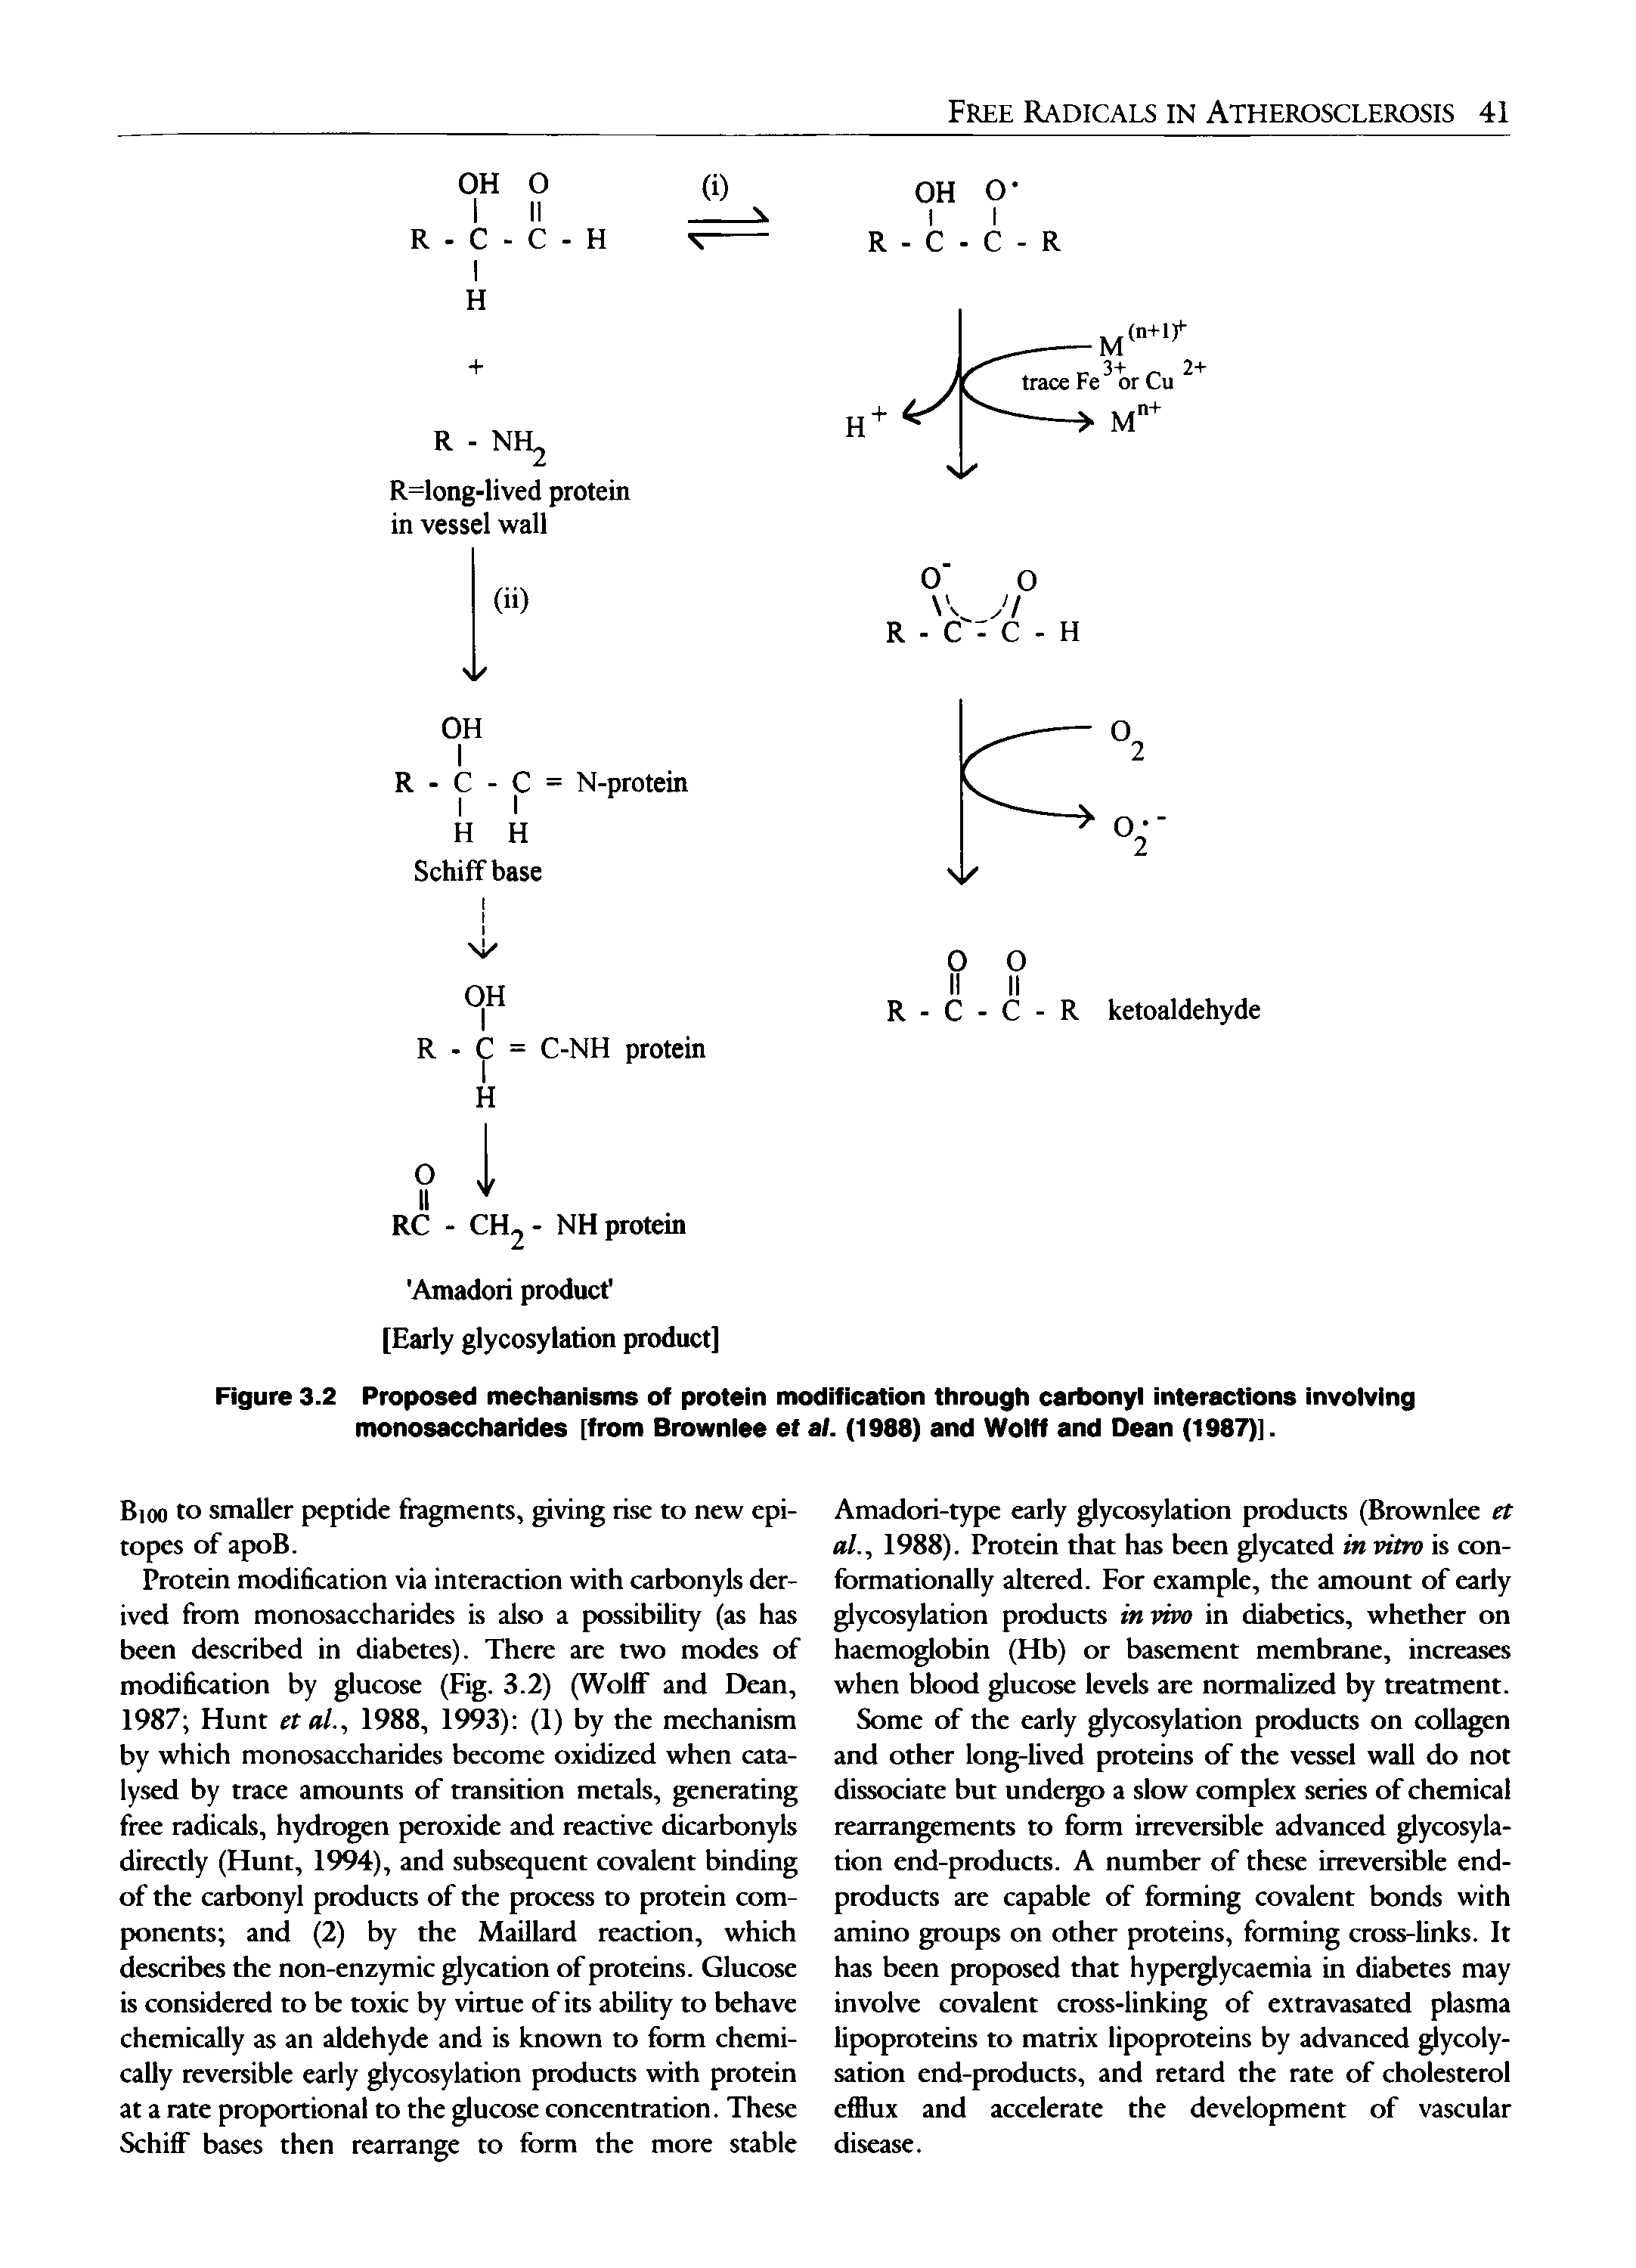 Figure 3.2 Proposed mechanisms of protein modification through carbonyi interactions involving monosaccharides [from Brownlee et af. (1988) and Wolff and Dean (1987)].